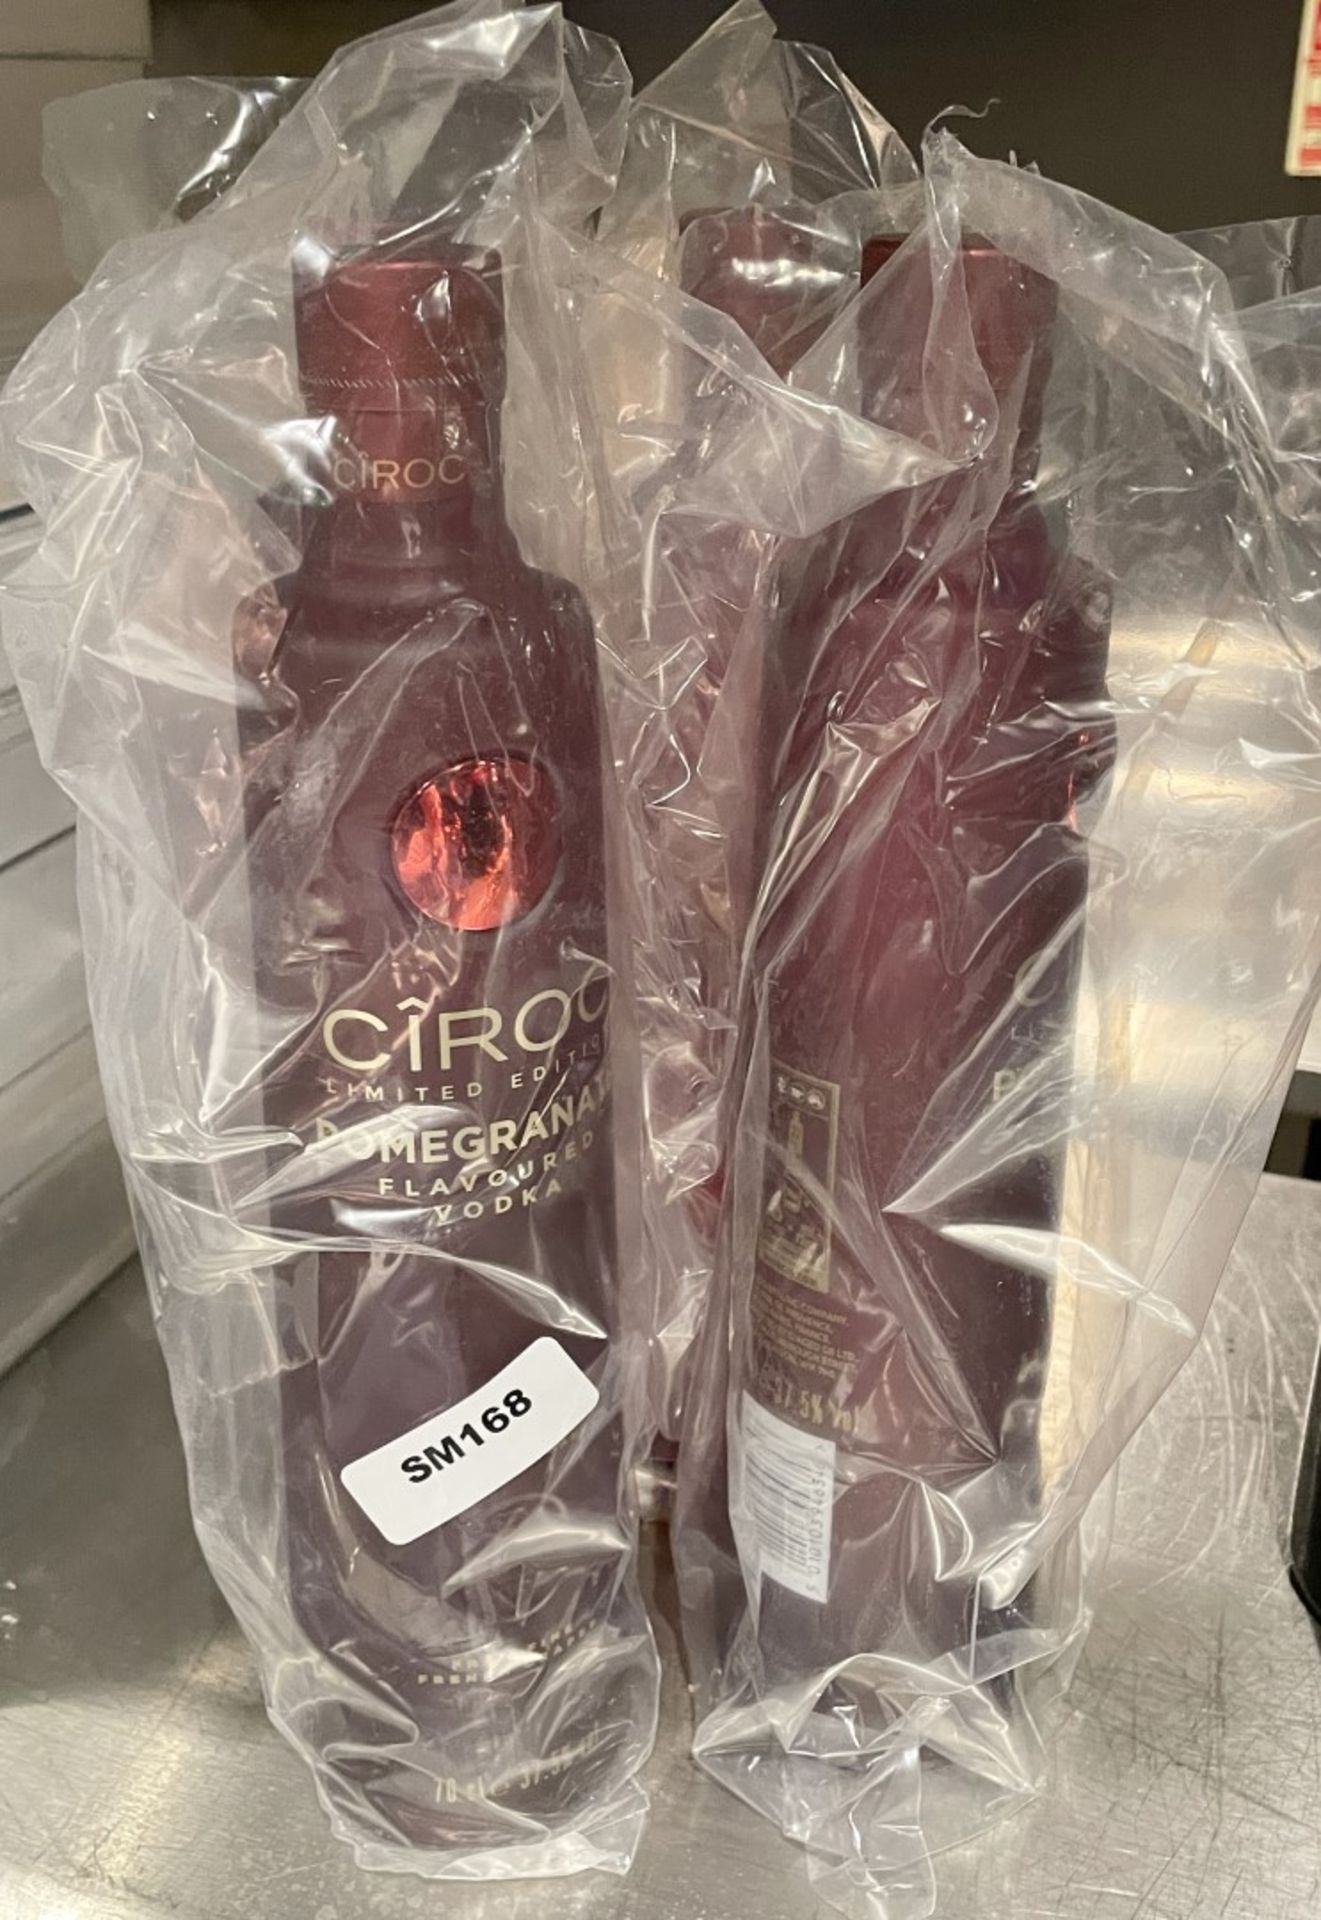 4 x Limited Edition 70cl Bottles of Ciroc Pomegranate Flavoured 37.5% Vodka - New Unopened Bottles - Image 6 of 6